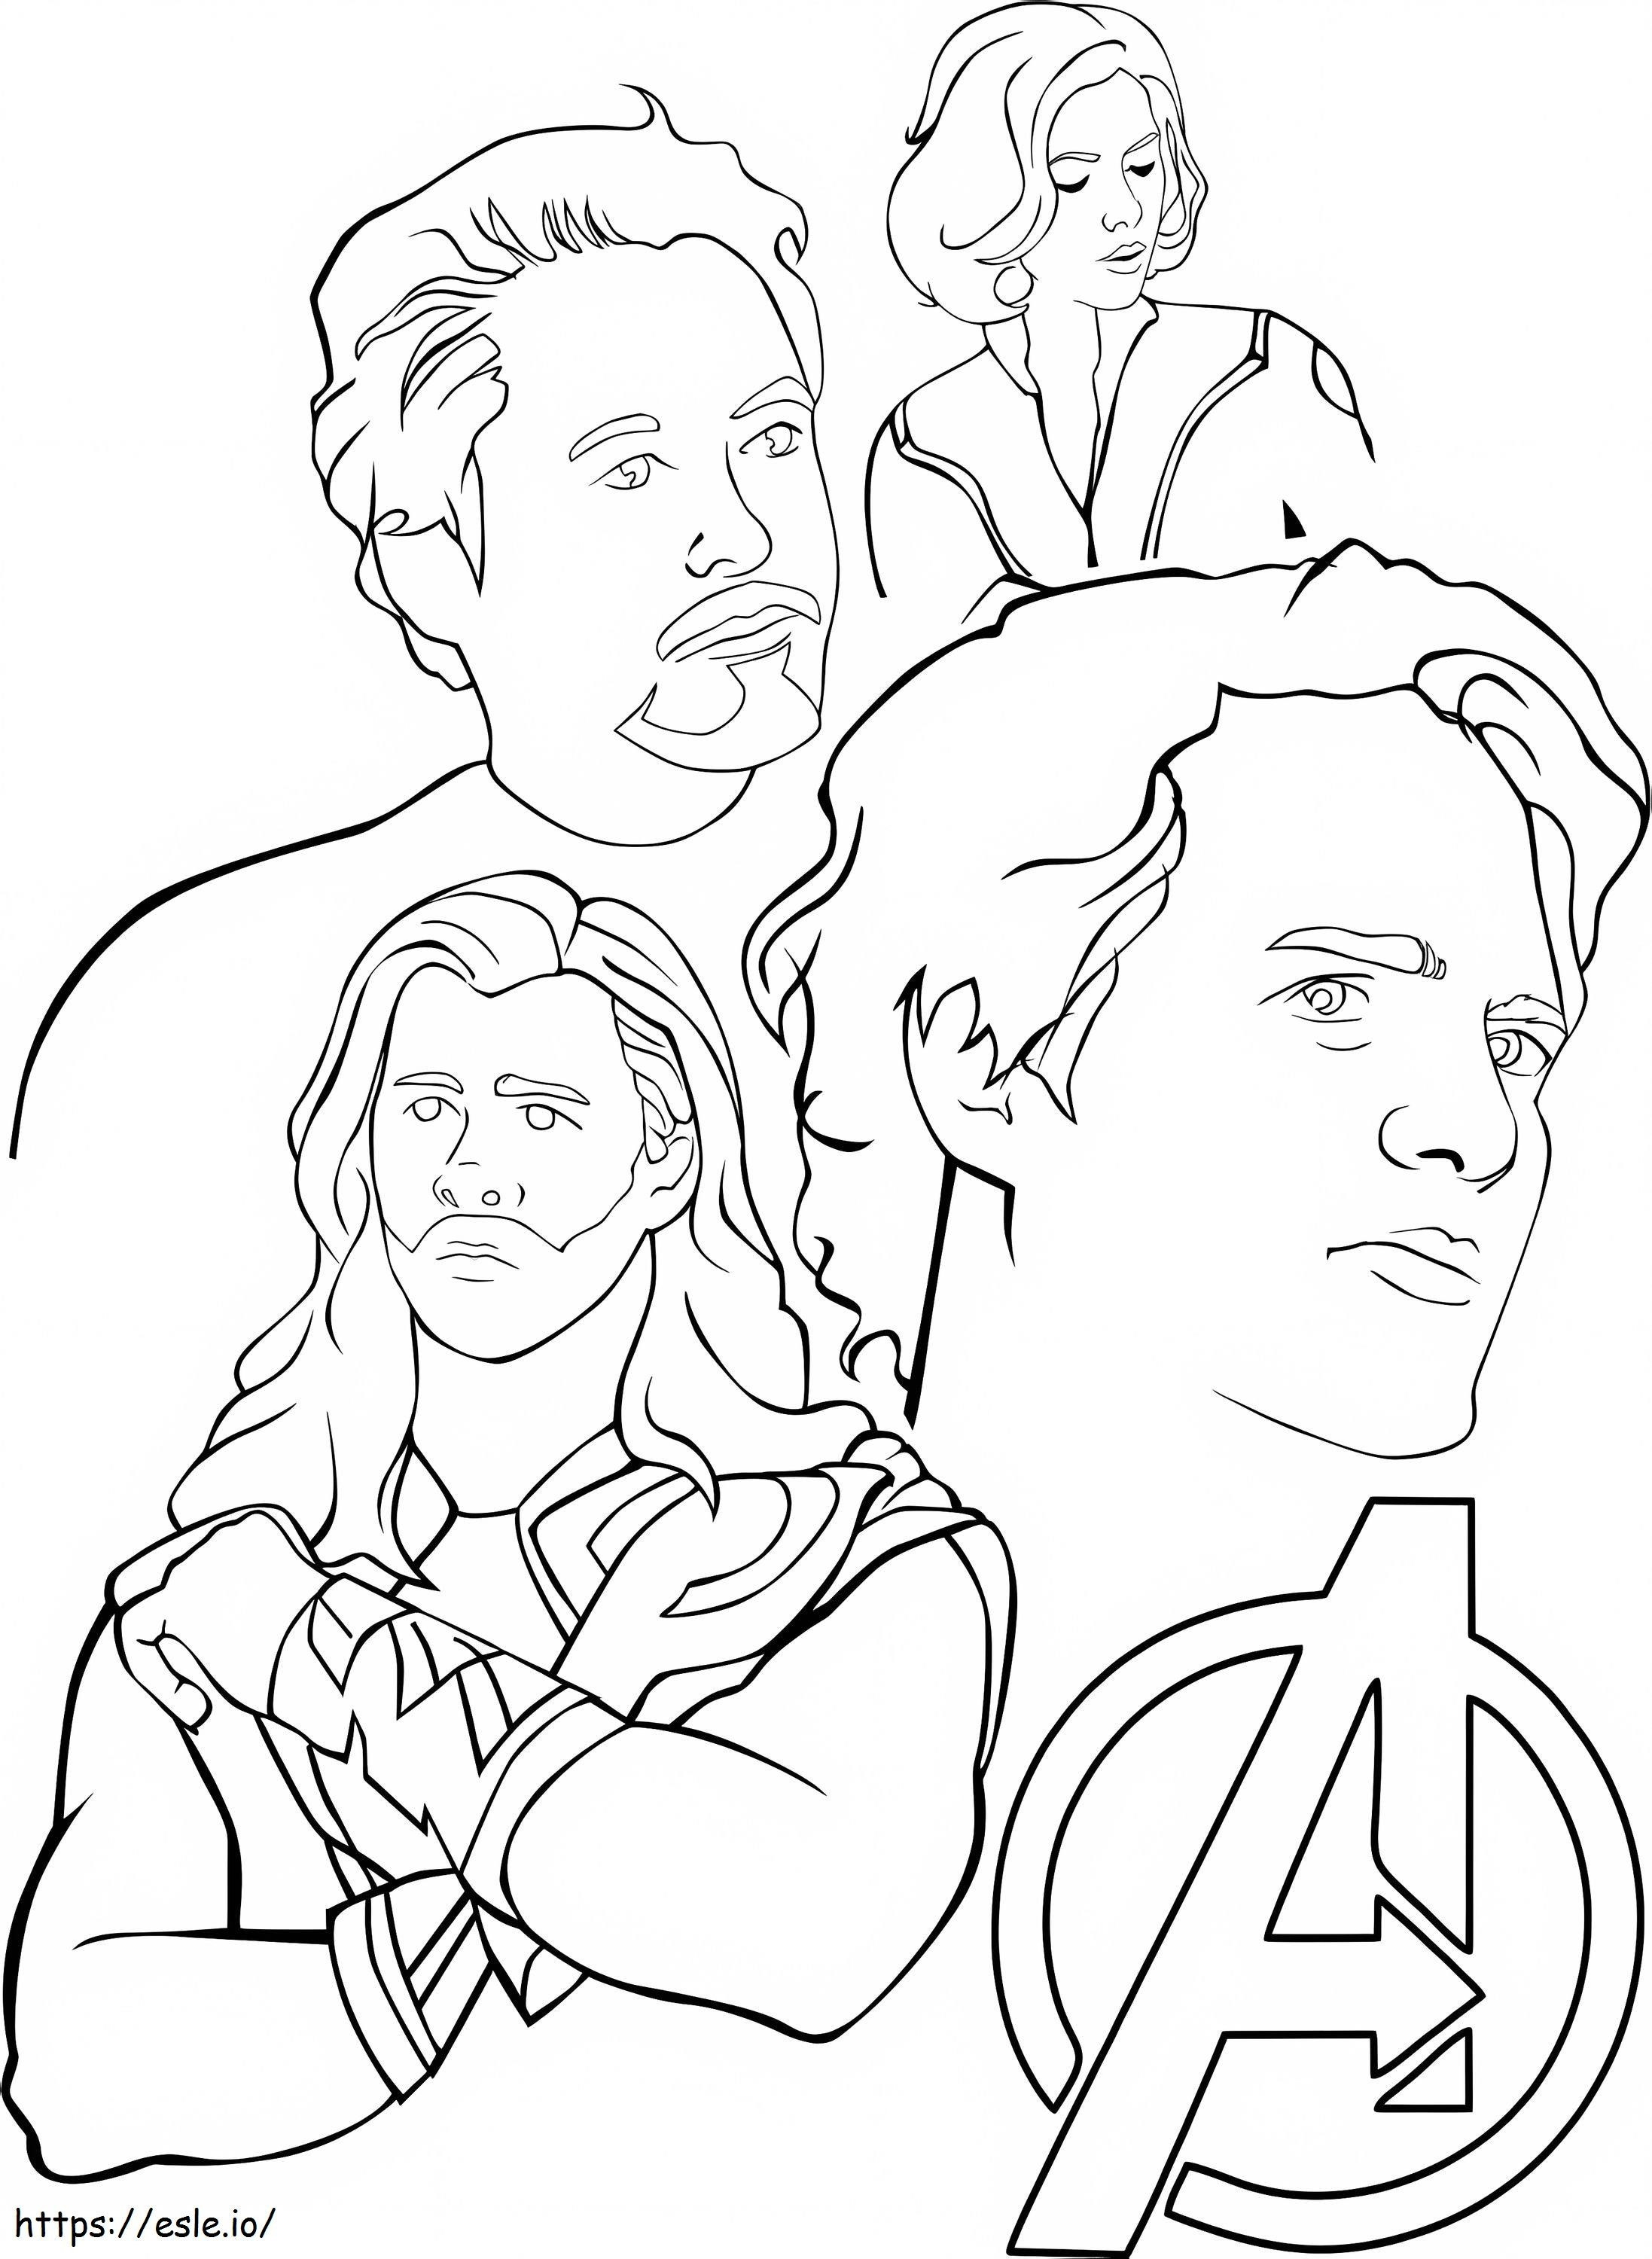 Avengers 8 coloring page